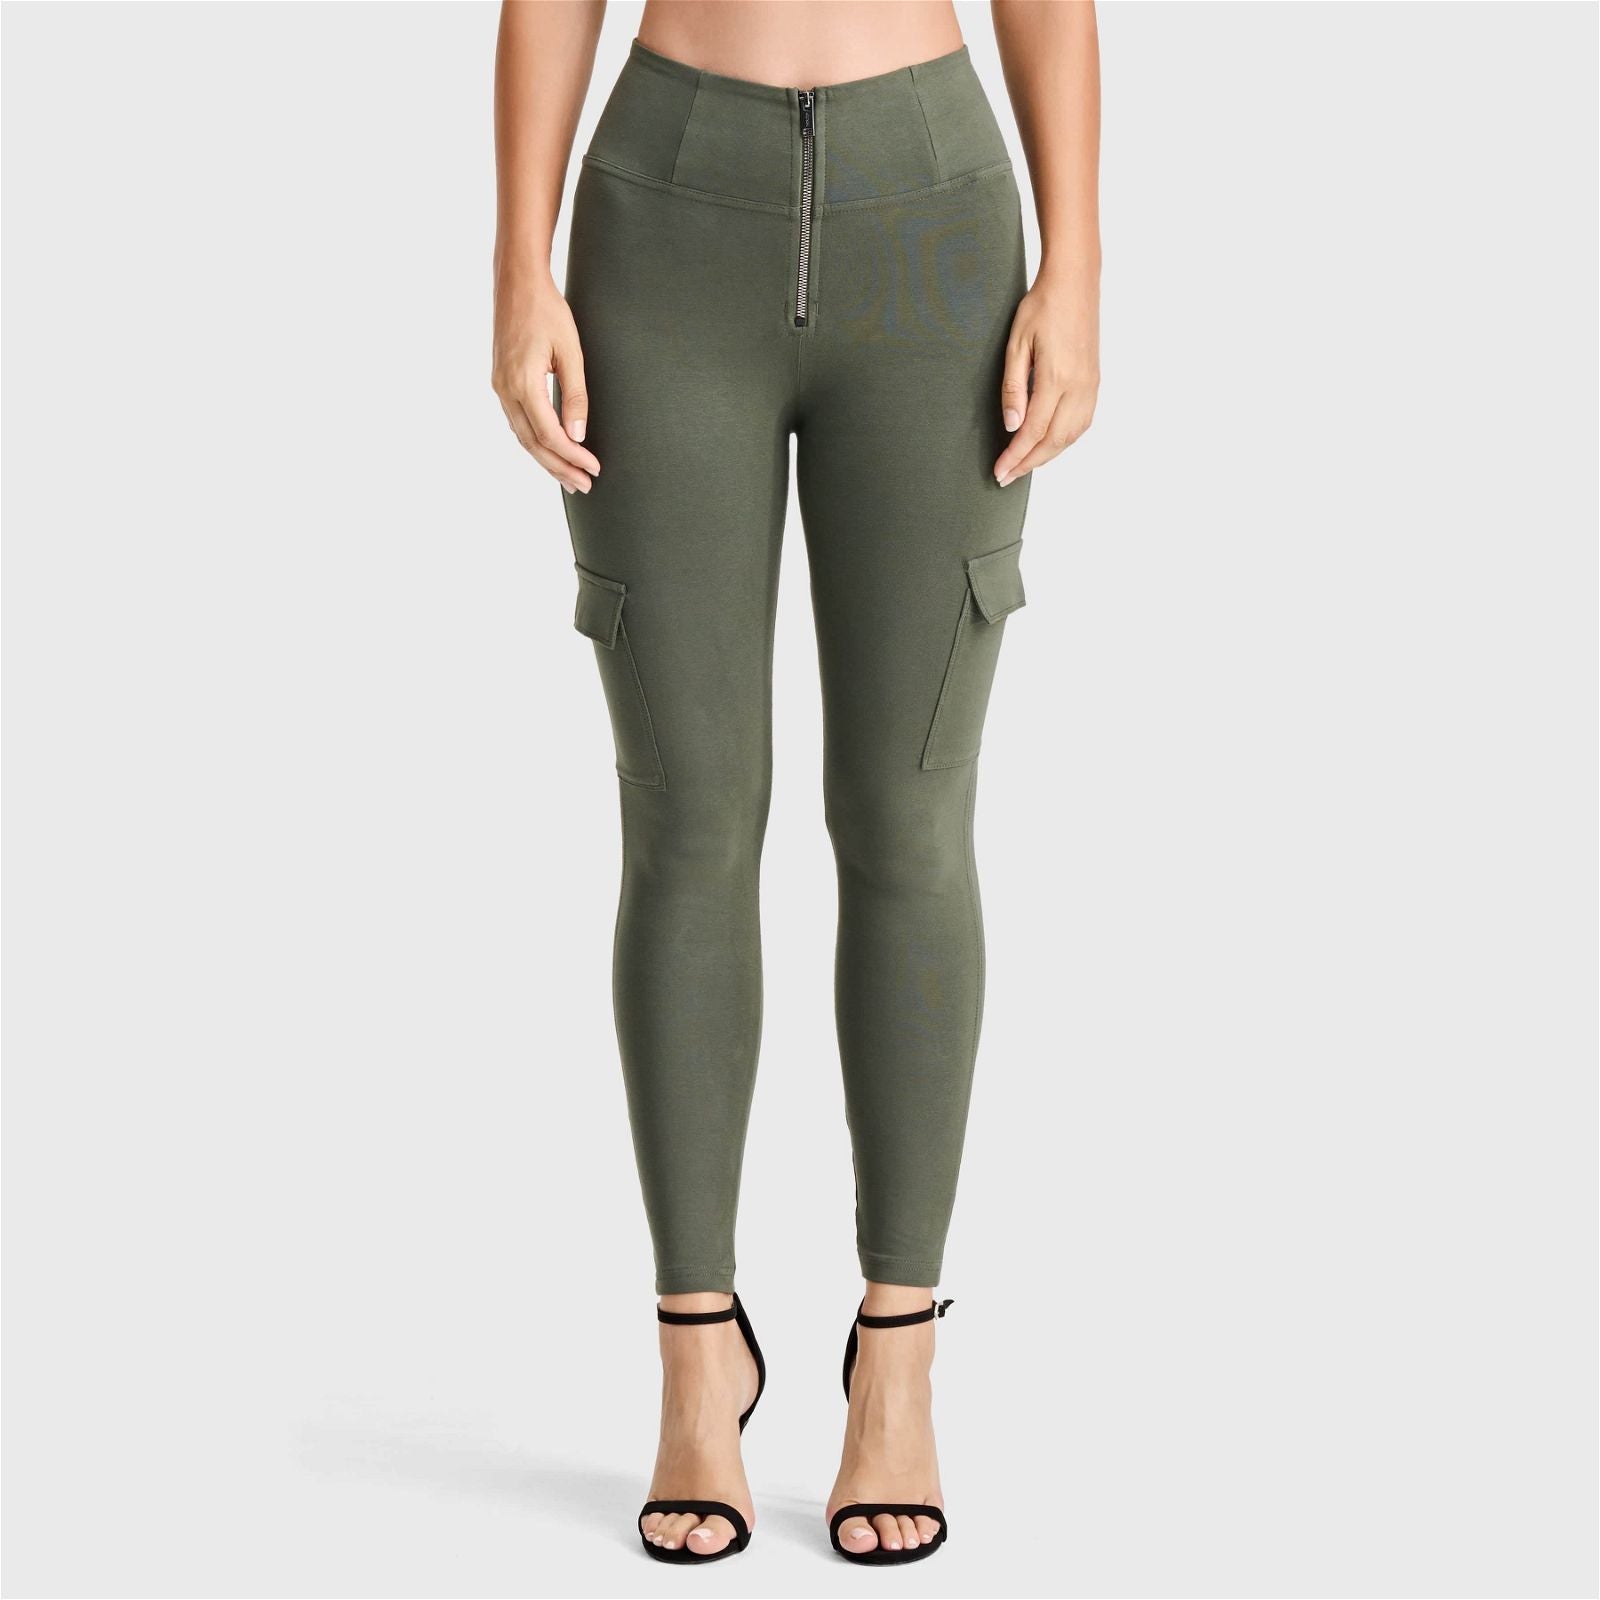 WR.UP® Cargo Fashion - High Waisted - 7/8 Length - Military Green 2